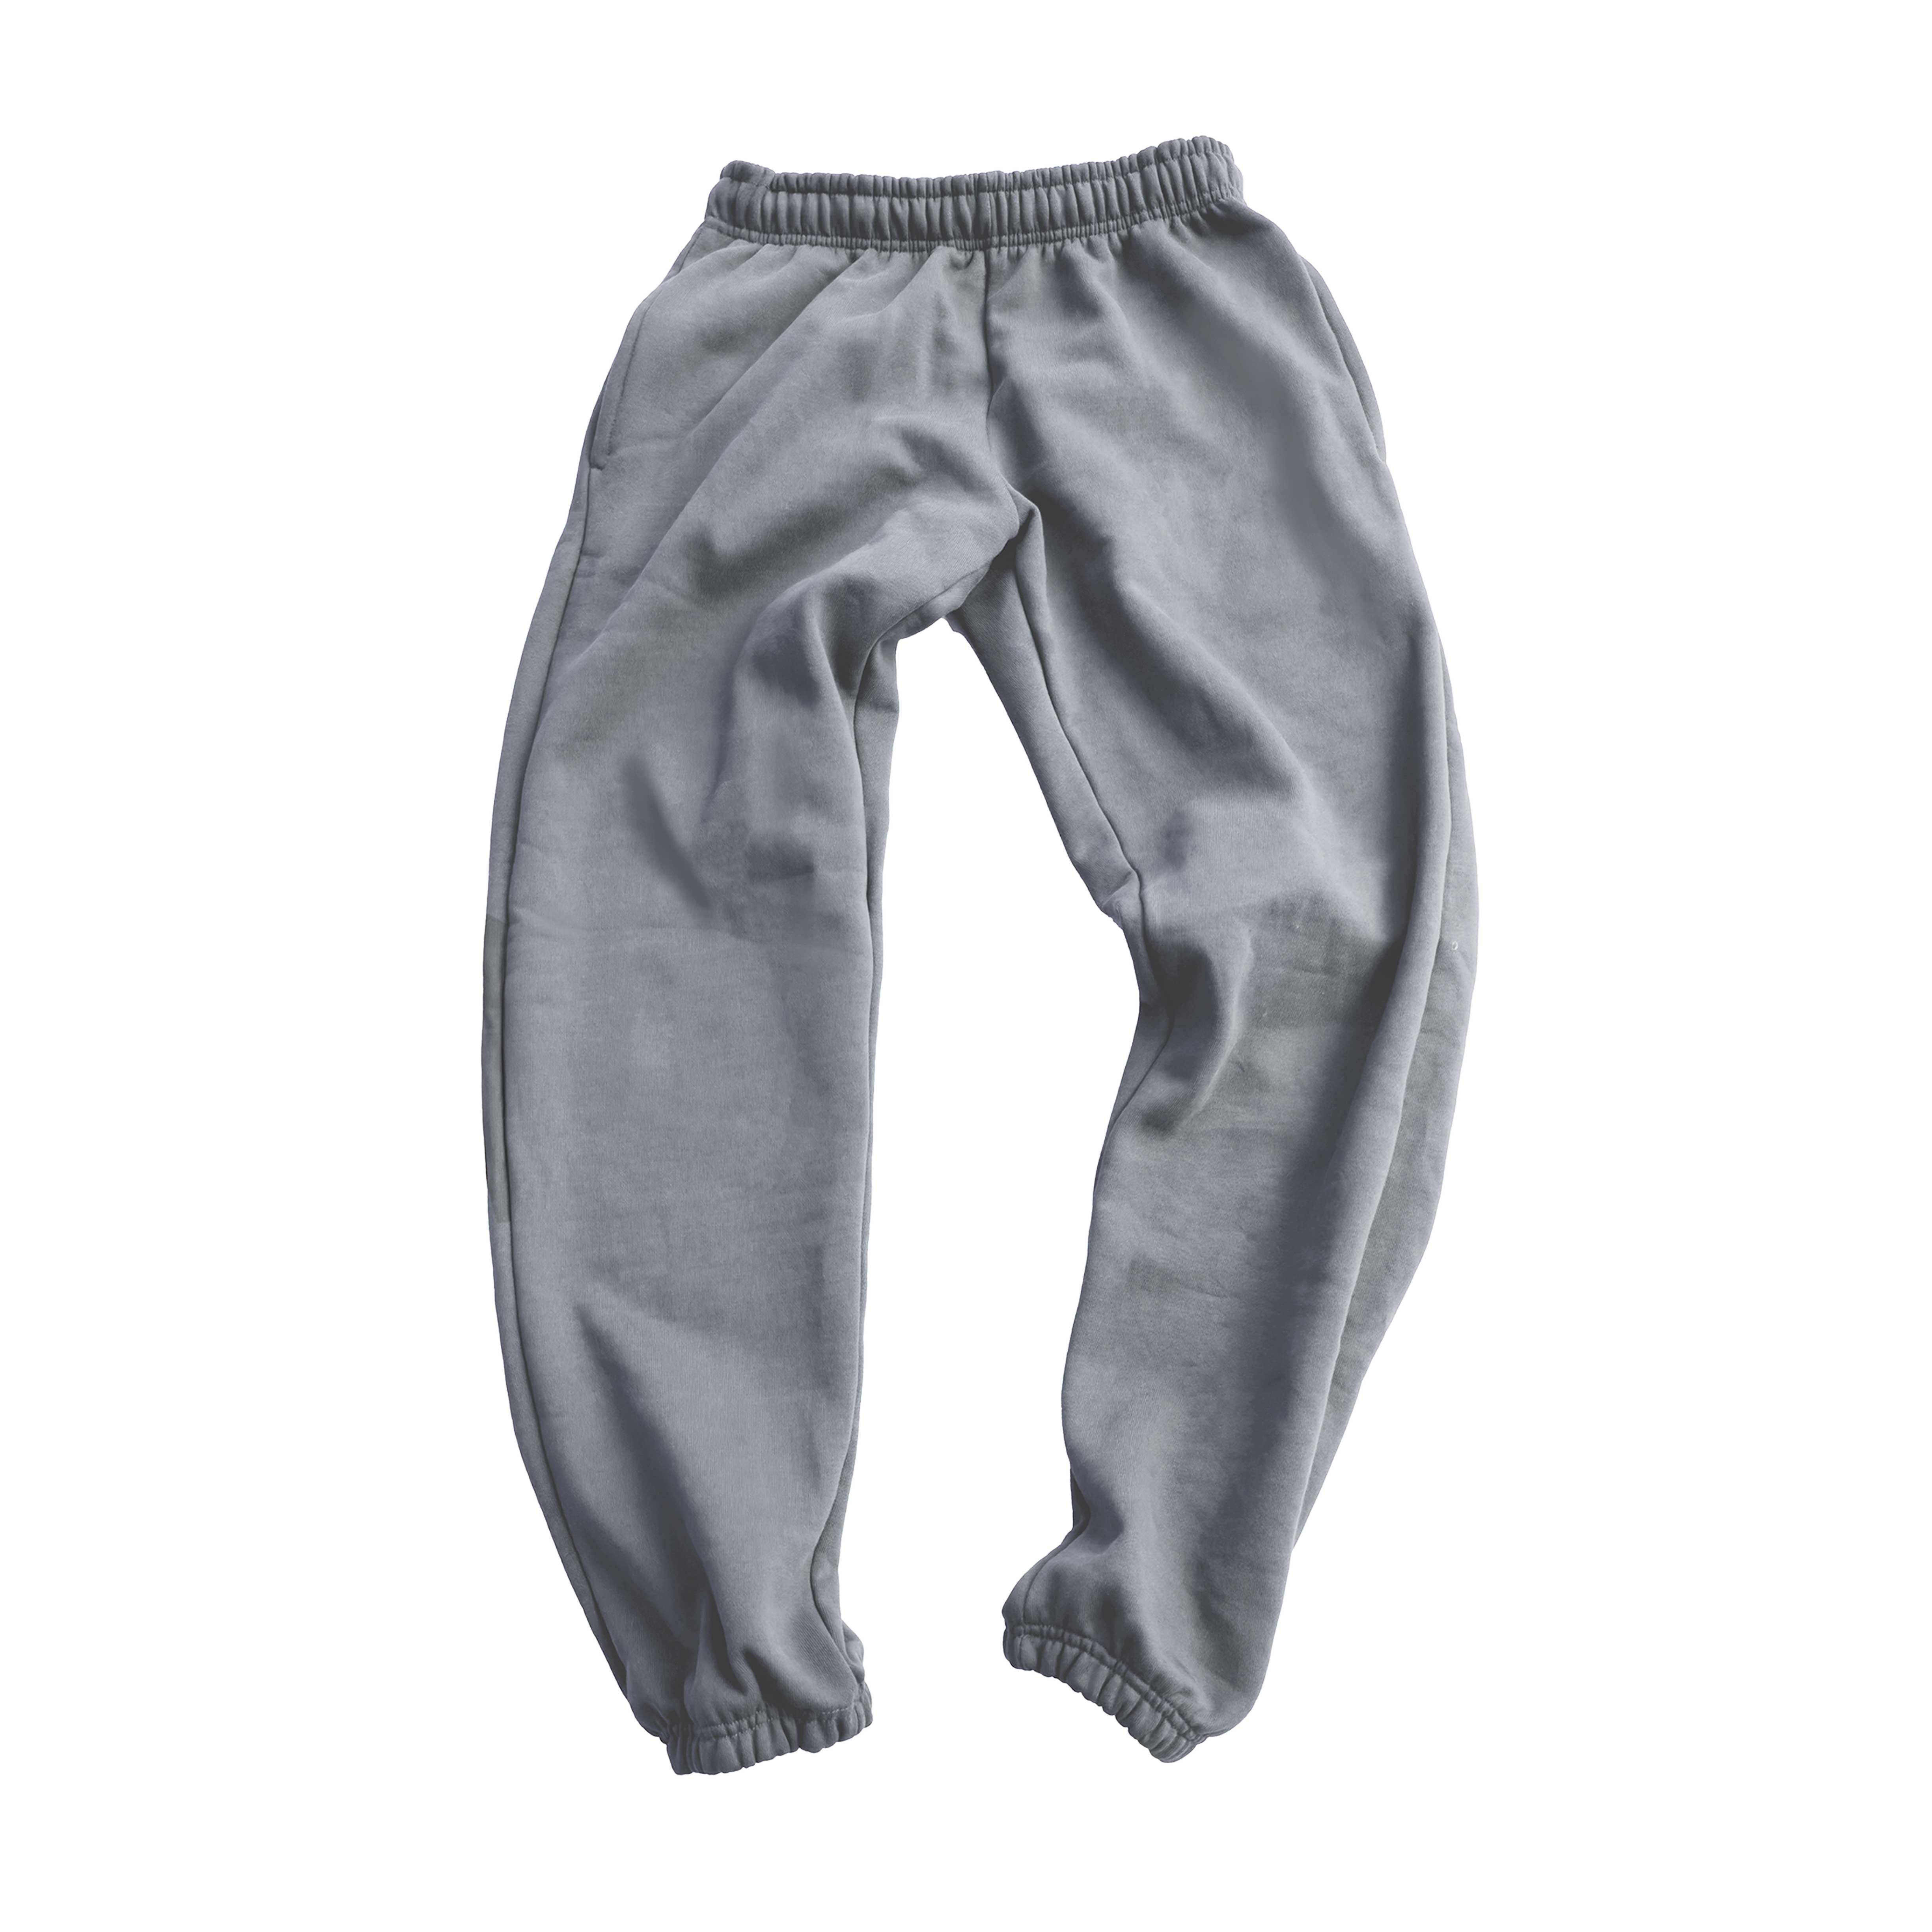 SE465 Oversized Sweat Pants- Silver Space Grey (Same Day Shipping)